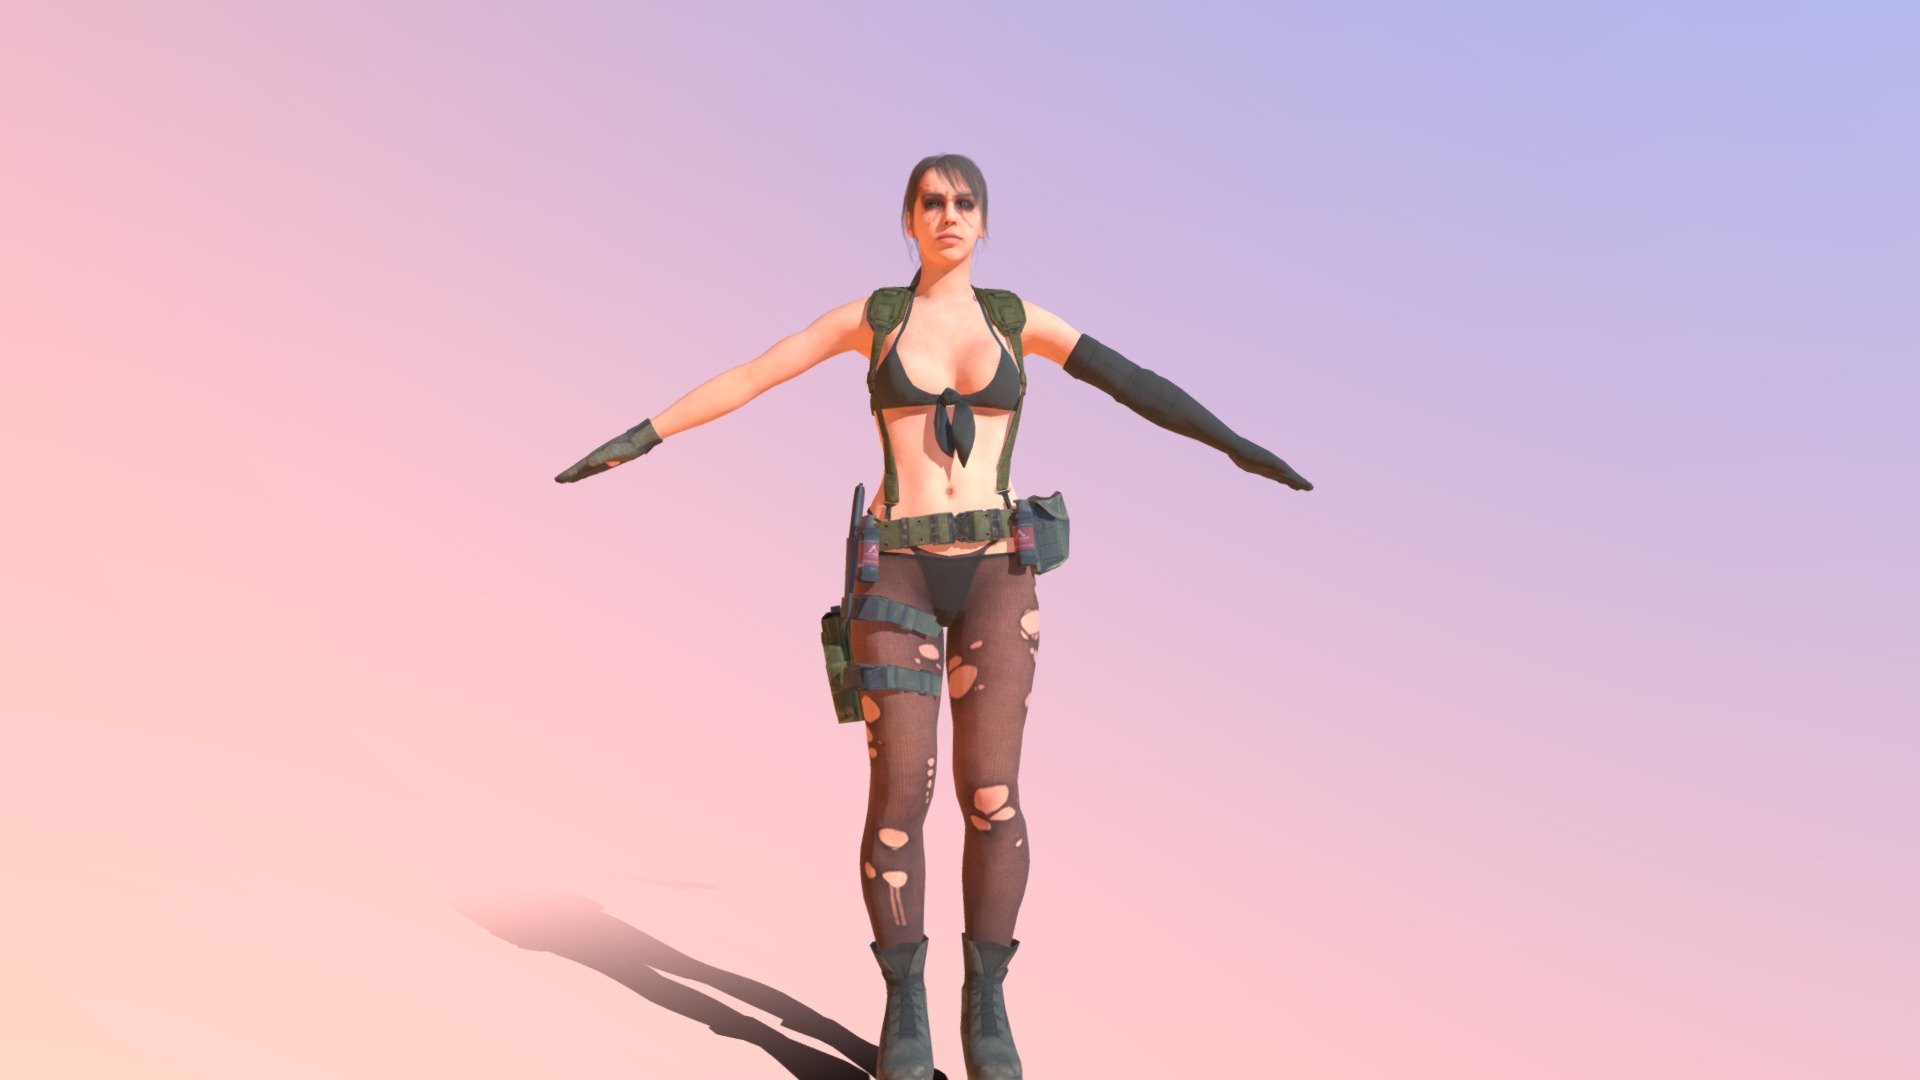 Quiet is a character from the video game series “Metal Gear Solid”. She is a skilled sniper and a member of the Diamond Dogs mercenary group. Quiet is known for her unique abilities, including the ability to become invisible and to move at high speeds. She is also known for her silence, as she does not speak throughout most of the game 3d model